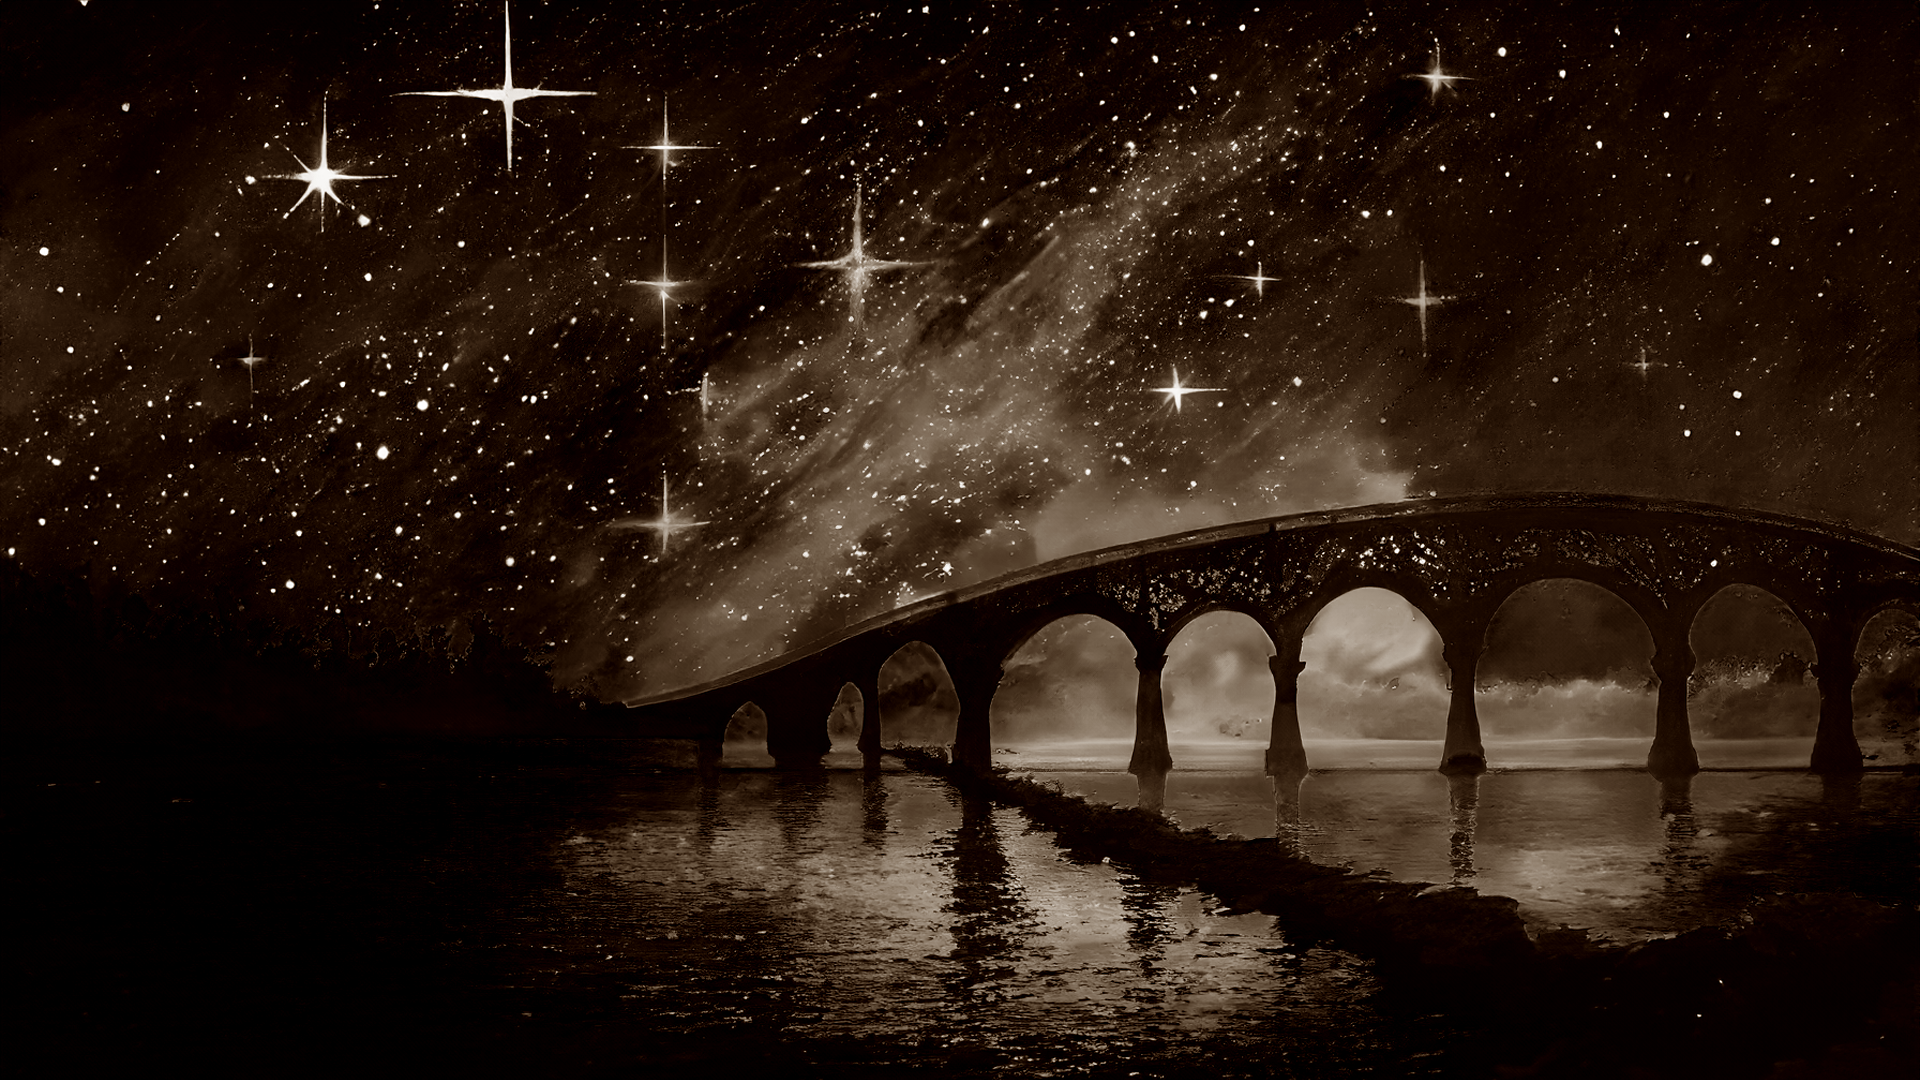 Starlit Bridge, by Firefly using a haiku-style prompt from Bard